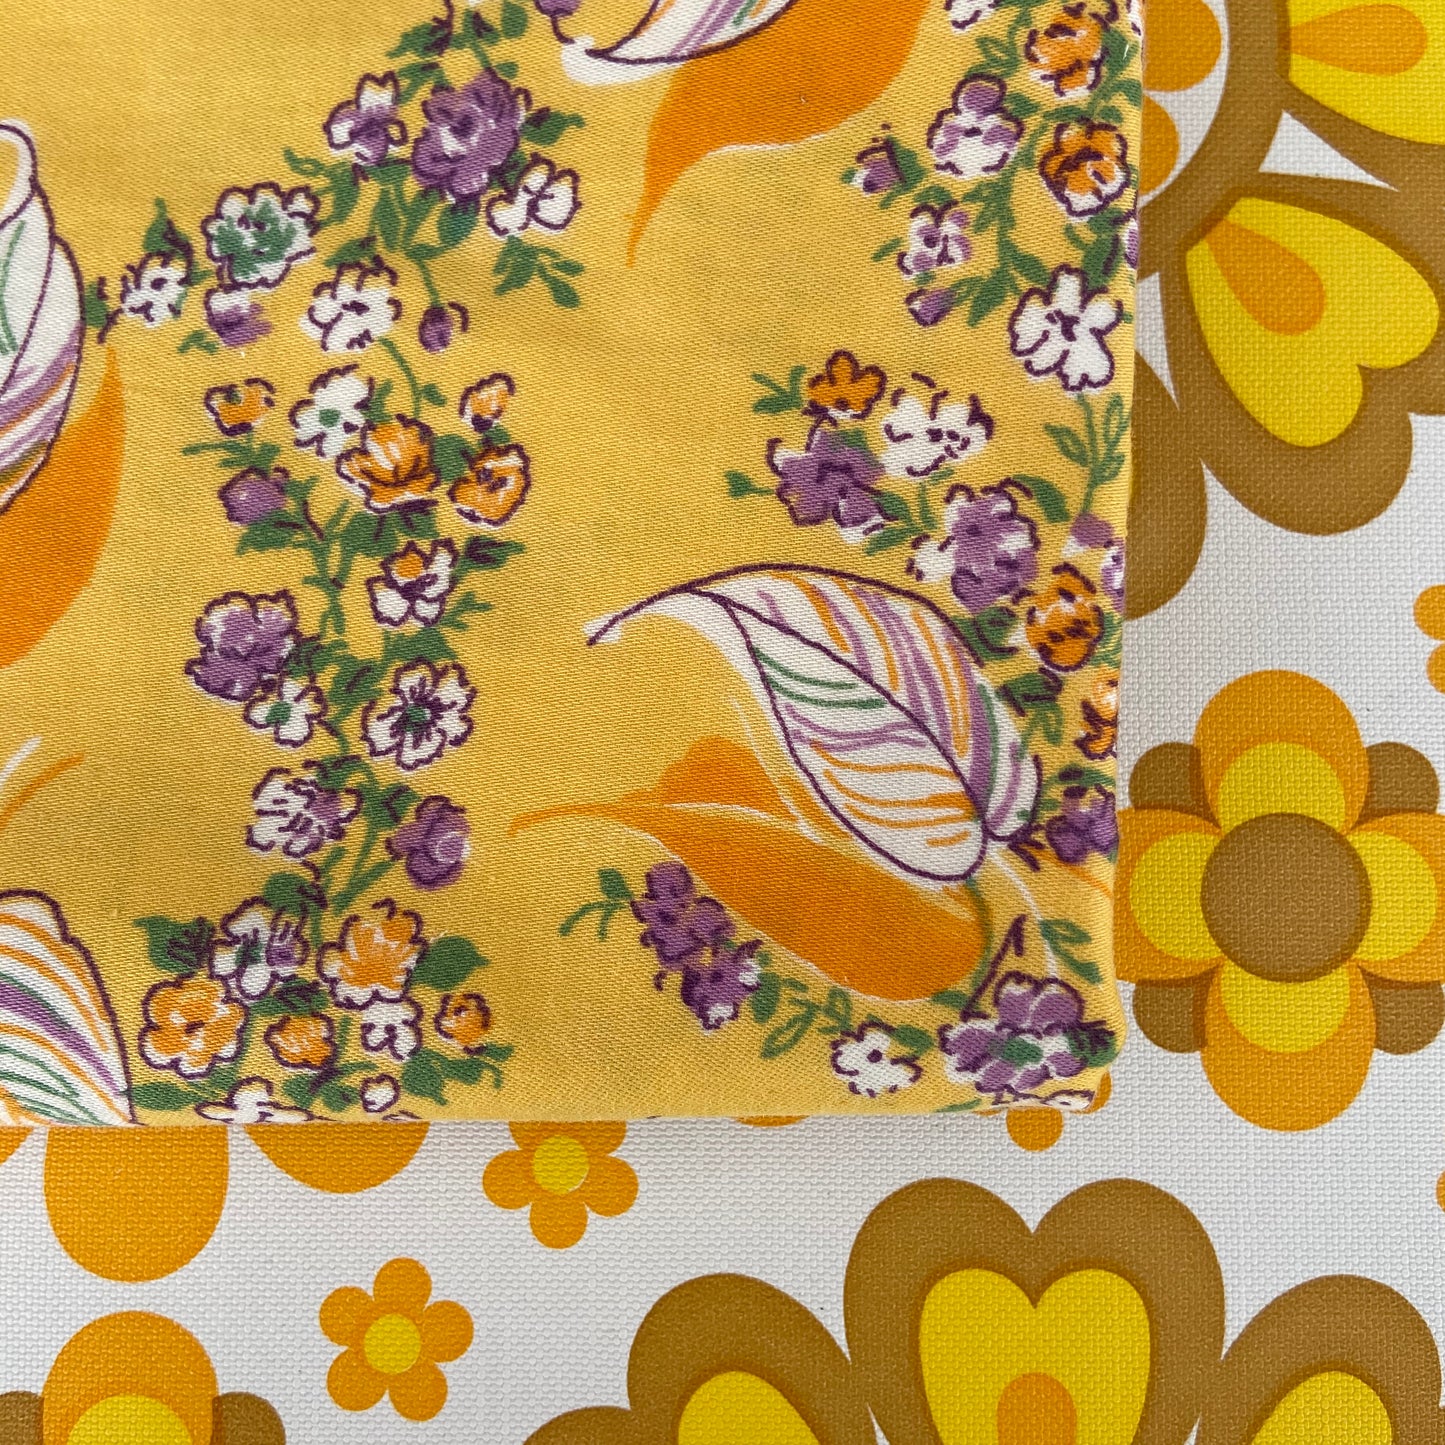 Cotton Remnant Fabric Orange Floral CRAFT Sewing PROJECTS